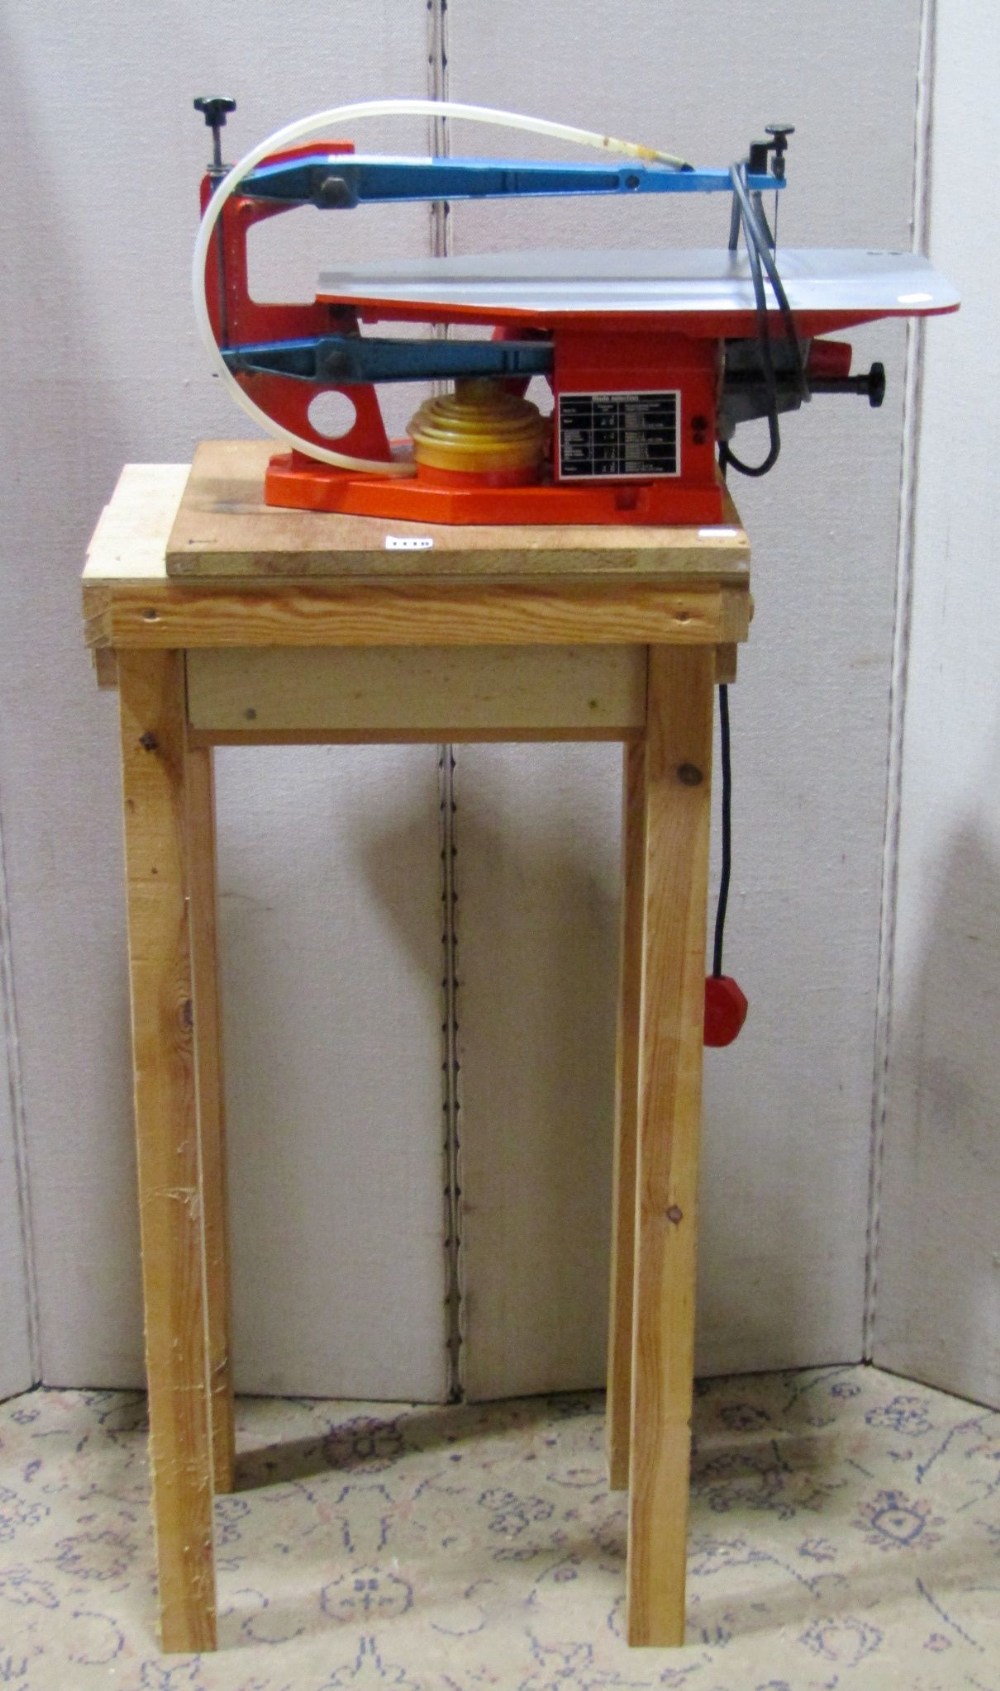 A Hegner Multicut-2 workshop electric fret saw mounted on a simple pine stand, together with a